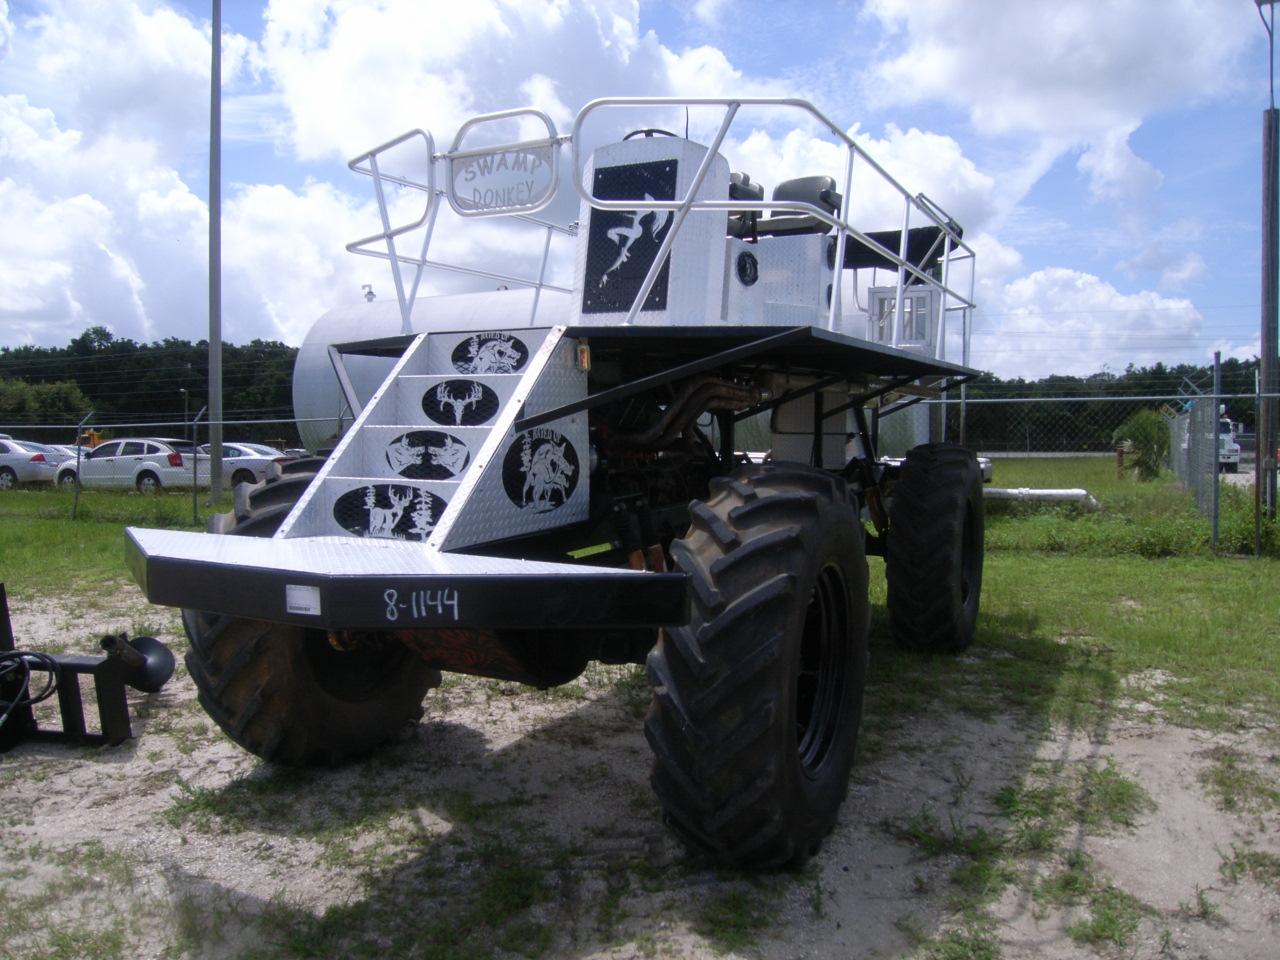 8-01144 (Equip.-Utility vehicle)  Seller:Private/Dealer ALL WHEEL DRIVE SWAMP BUGGY